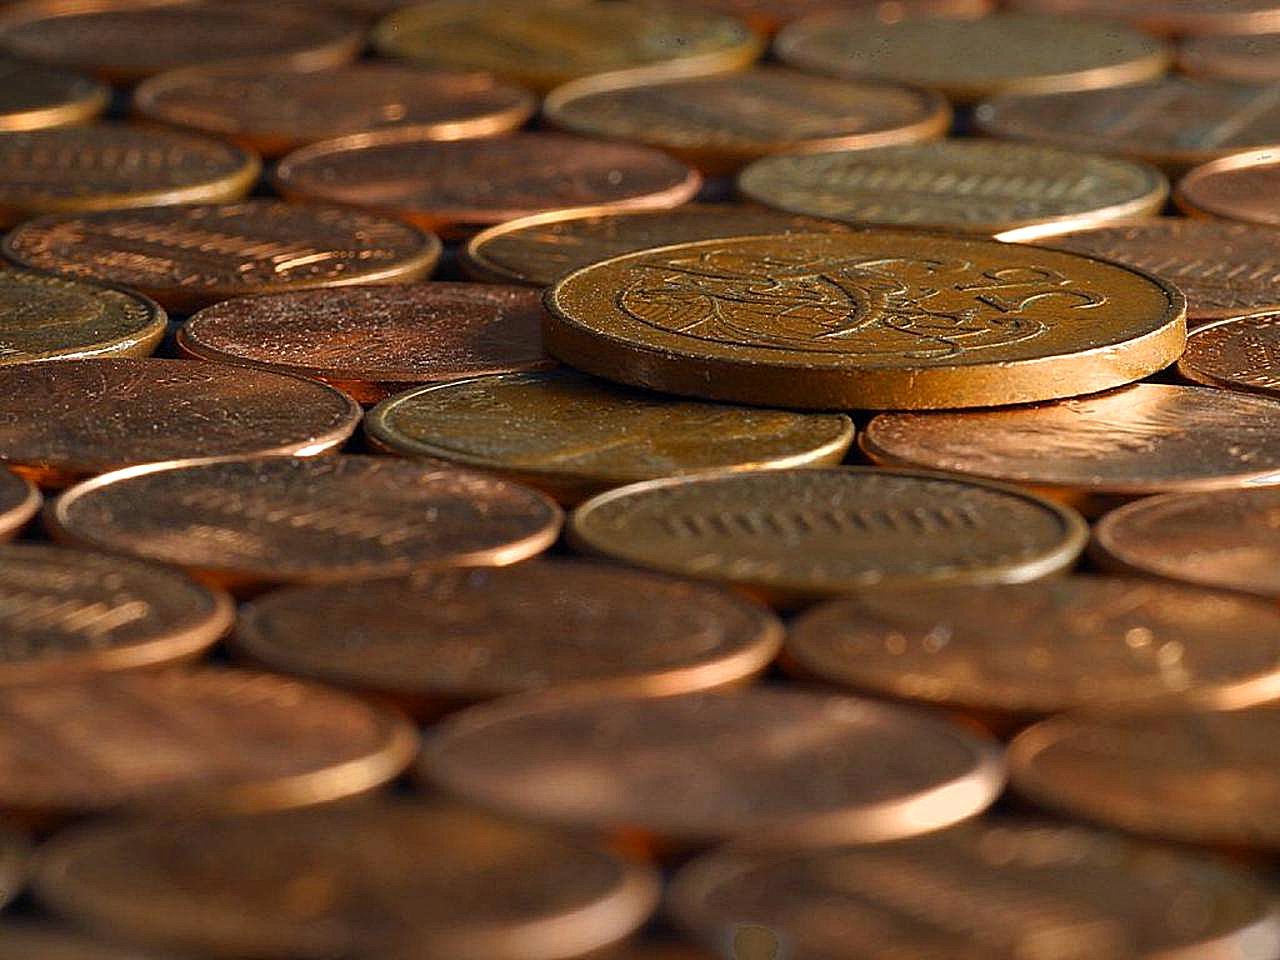 penny pennies coins copper